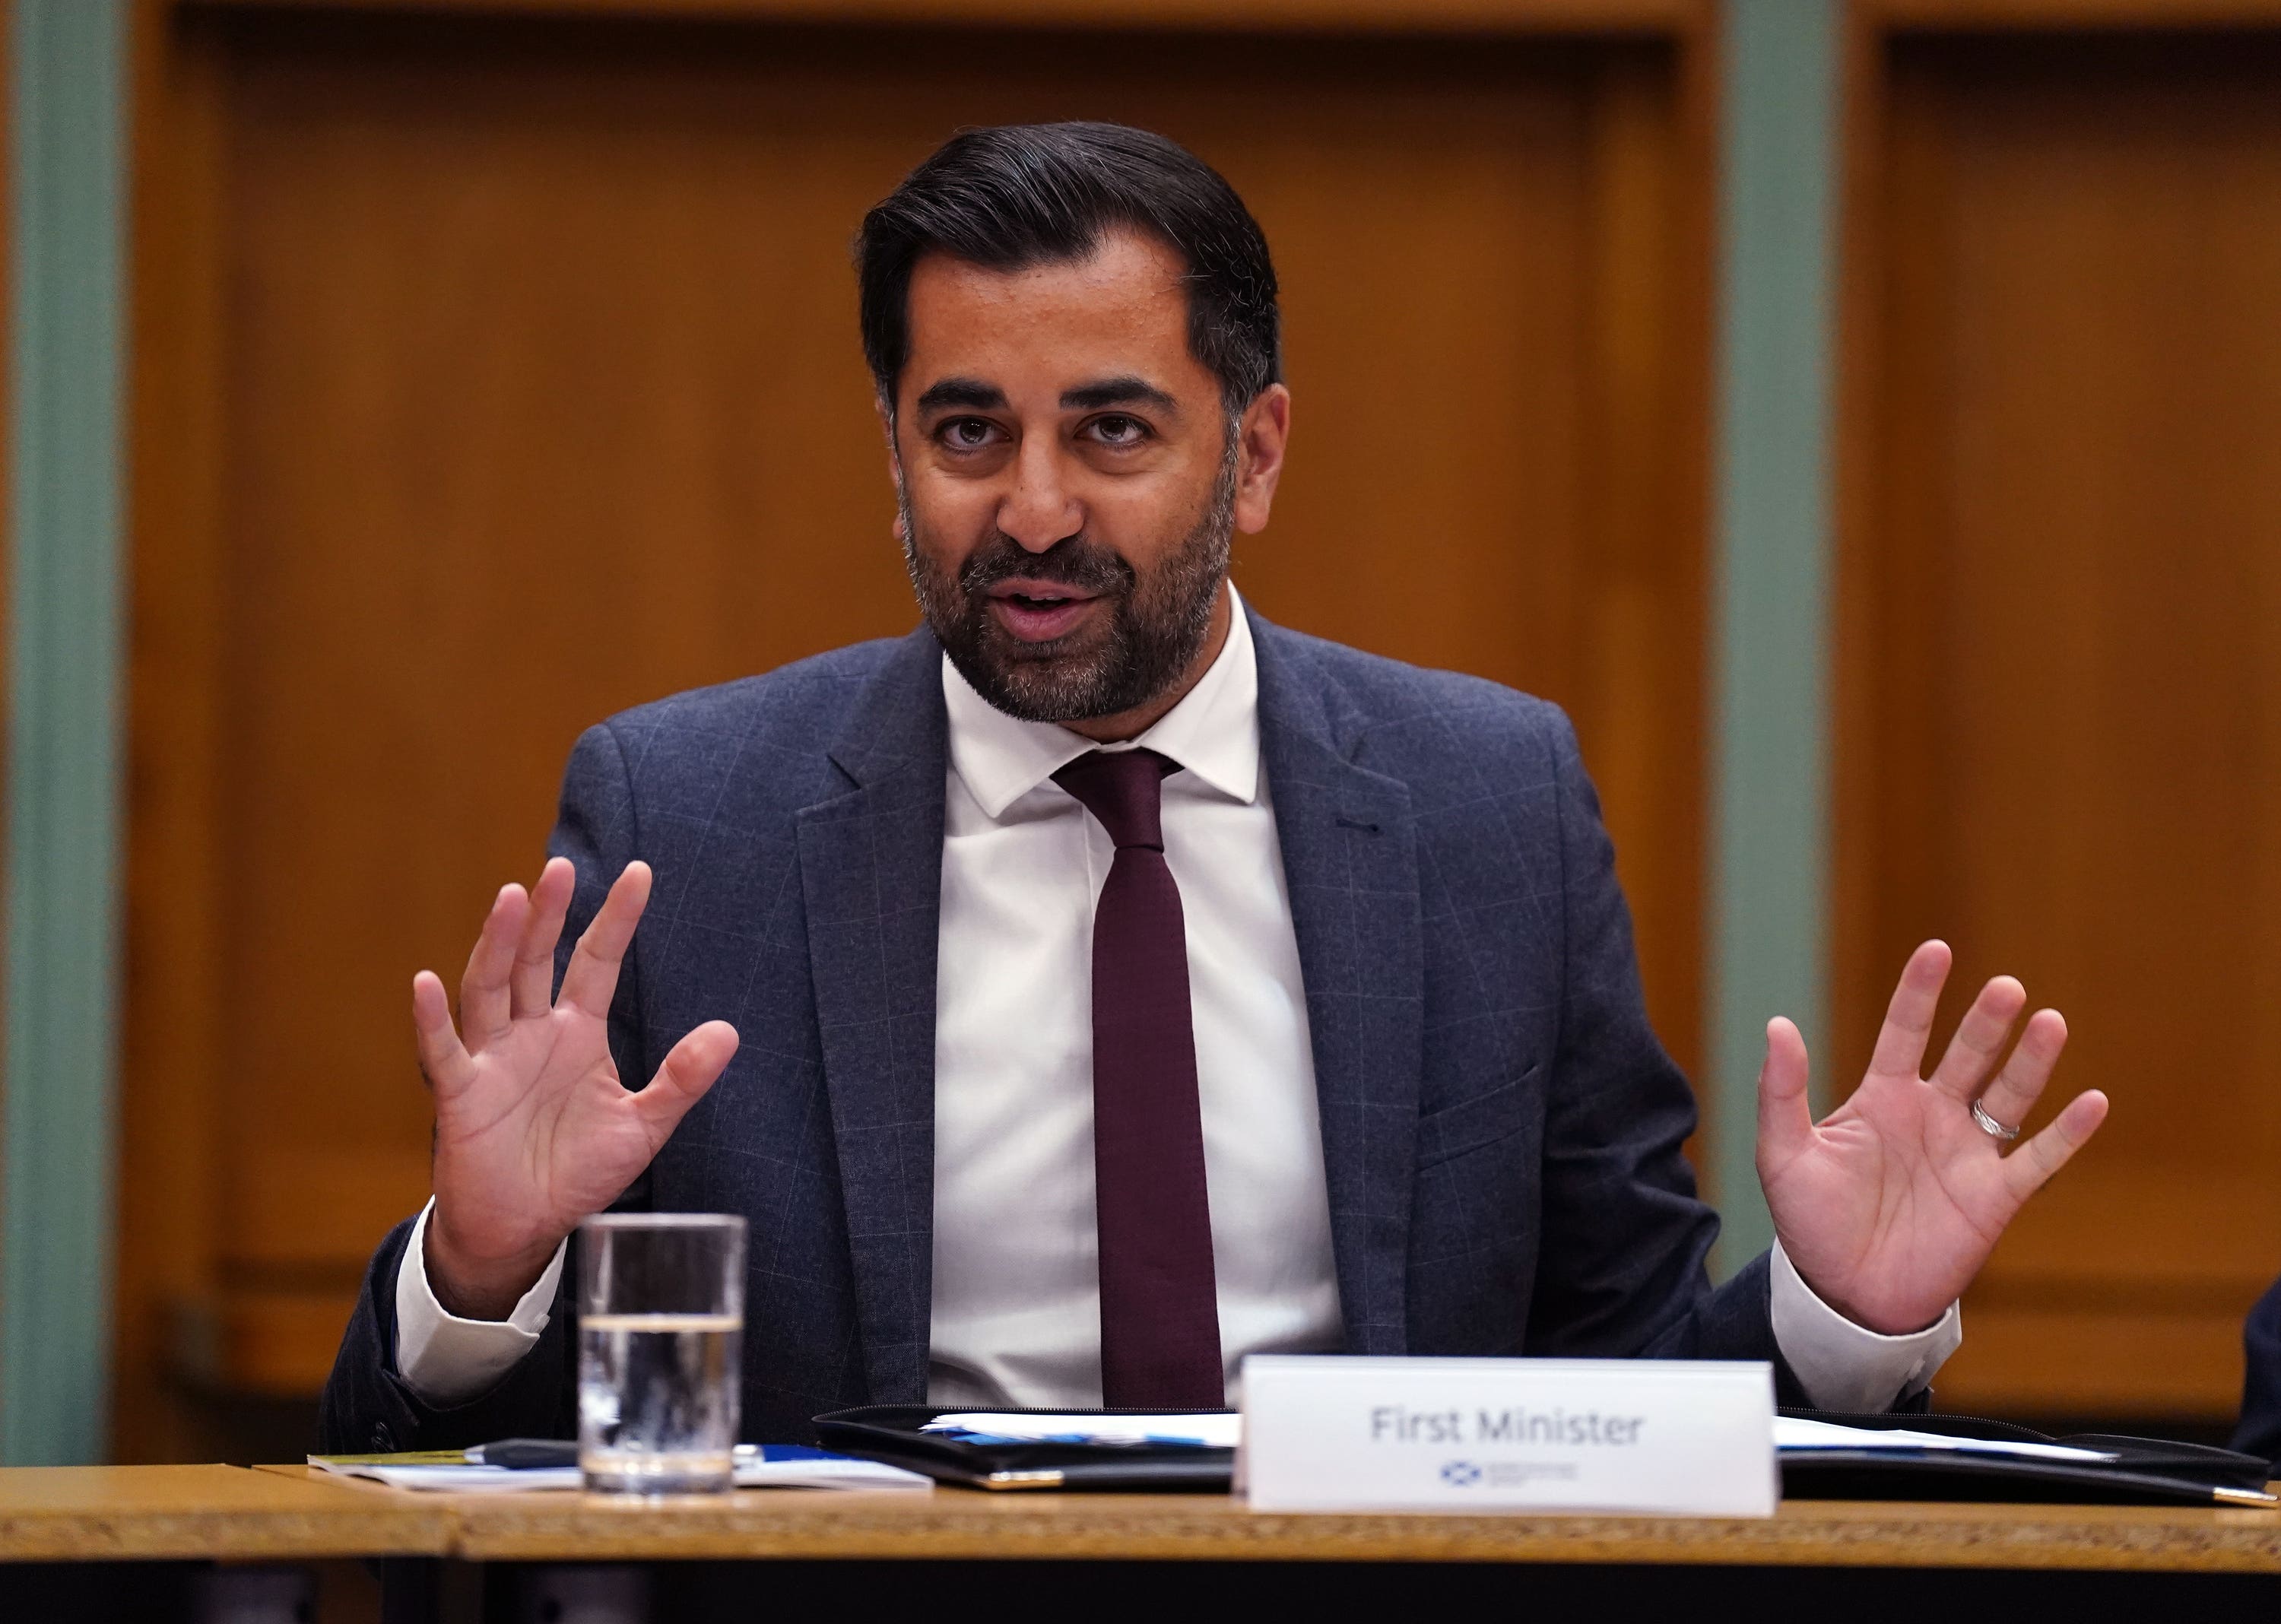 First Minister Humza Yousaf 